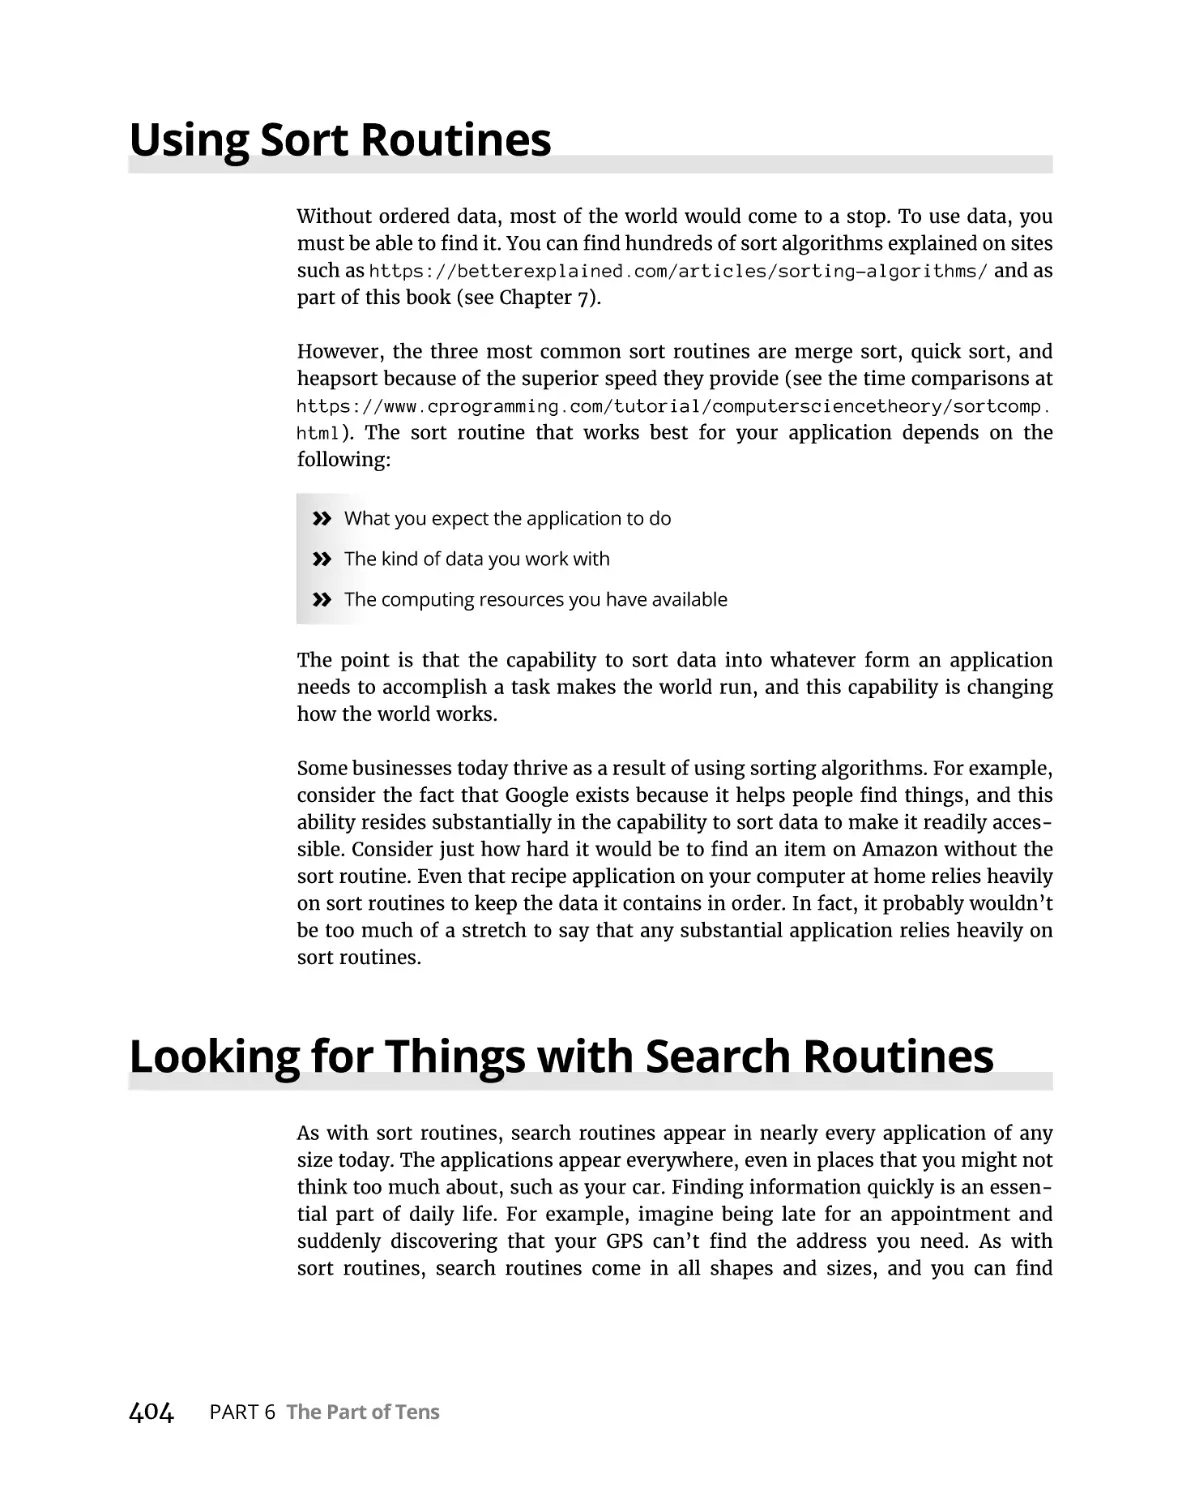 Using Sort Routines
Looking for Things with Search Routines